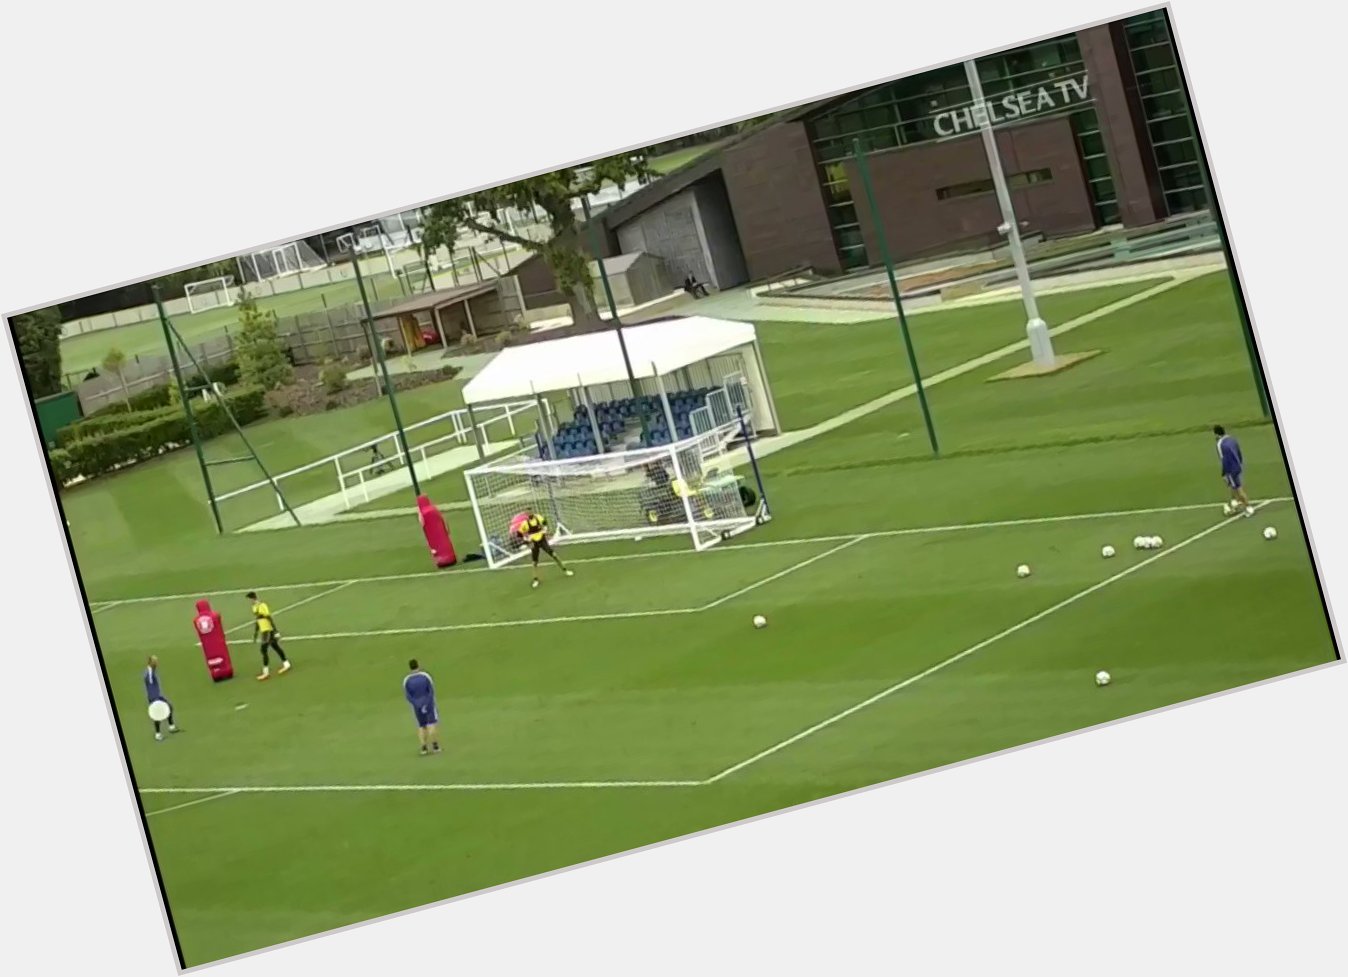 Happy birthday to Thibaut Courtois!   Who remembers this goal and celebration in training? 